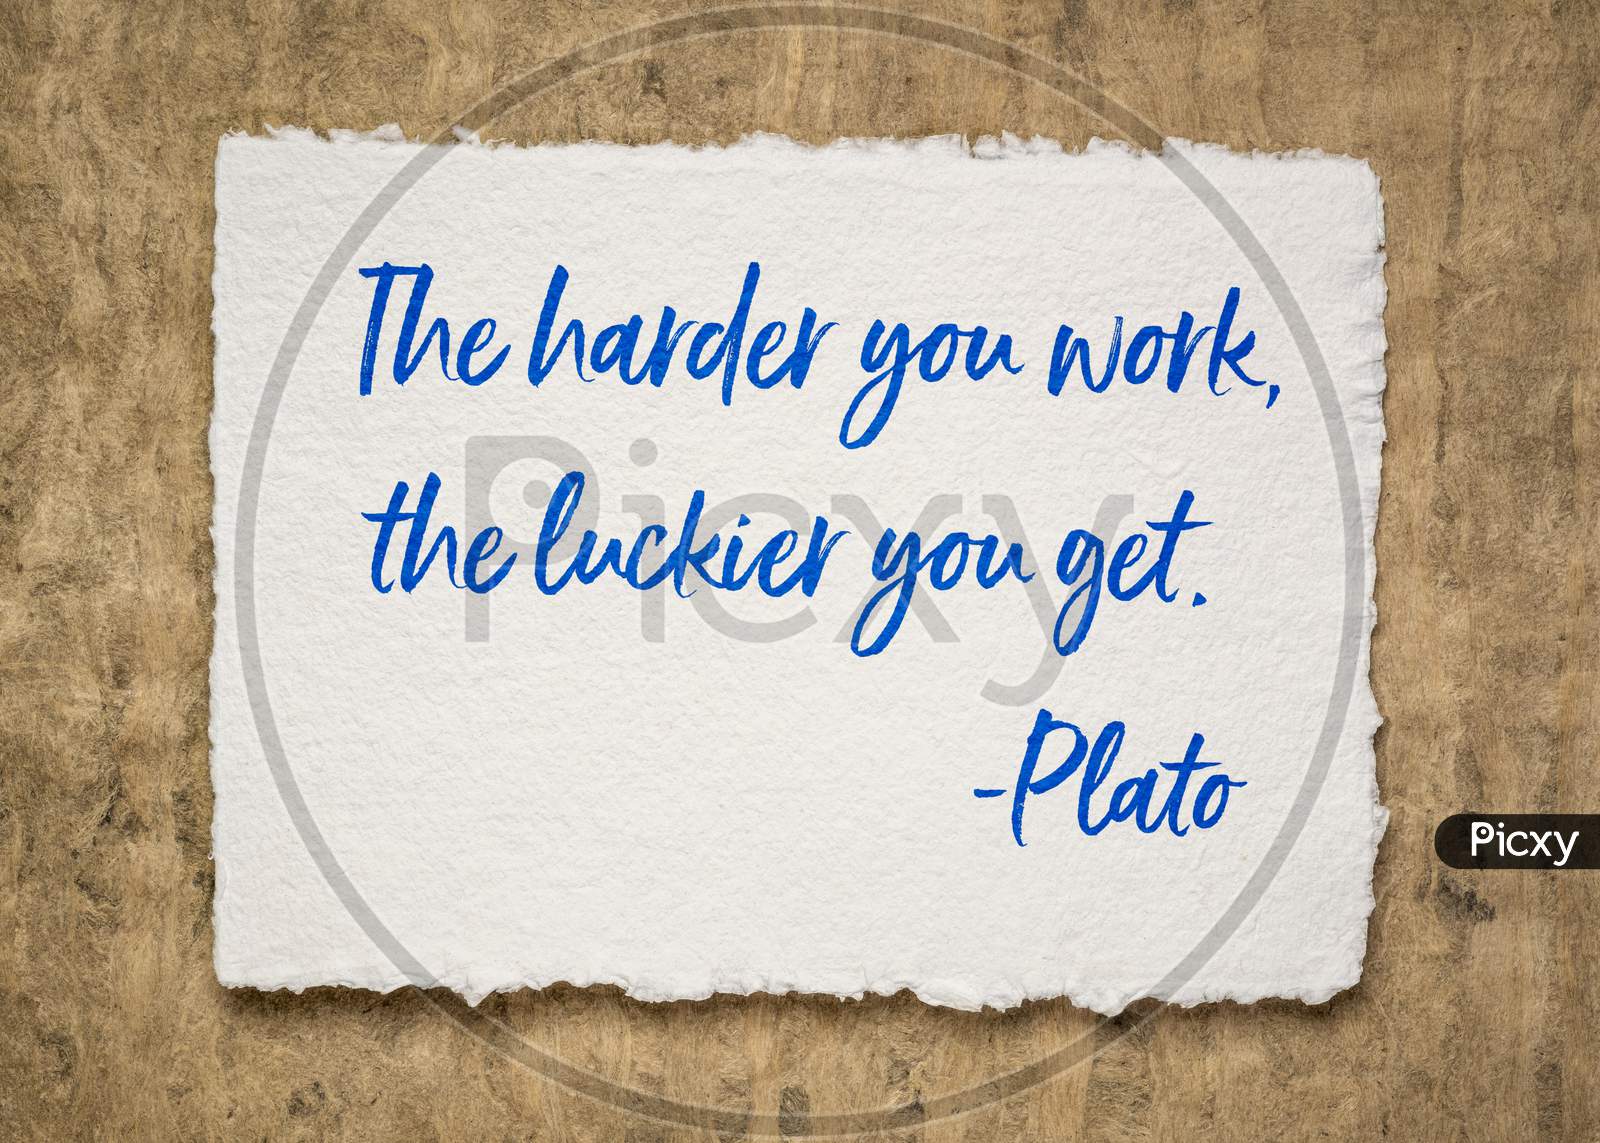 The Harder You Work, The Luckier You Get - Motivational Quote By Ancient Greek Philosopher Plato, Inspiration, Education And Personal Development Concept.